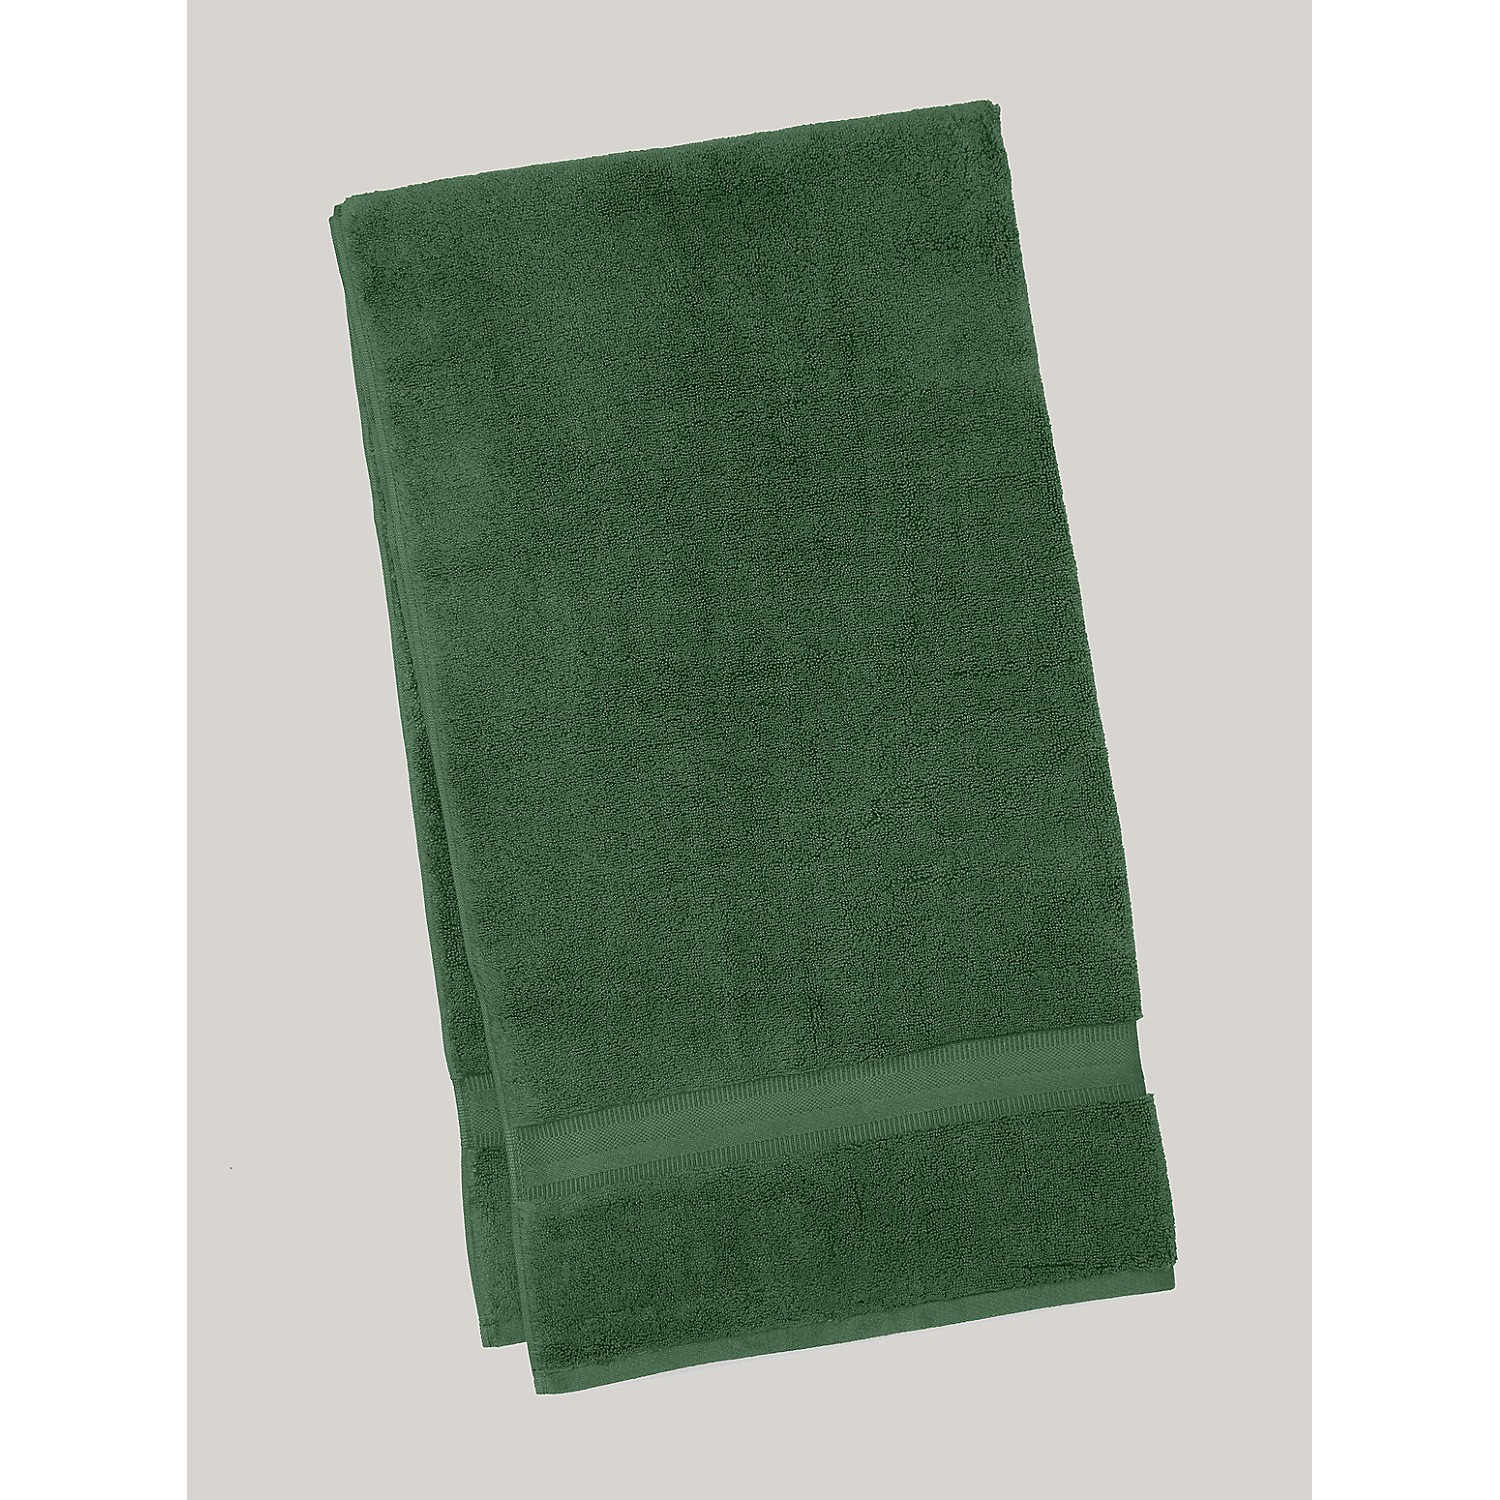 TOMMY HILFIGER Signature Solid Bath Towel in Pine Needle